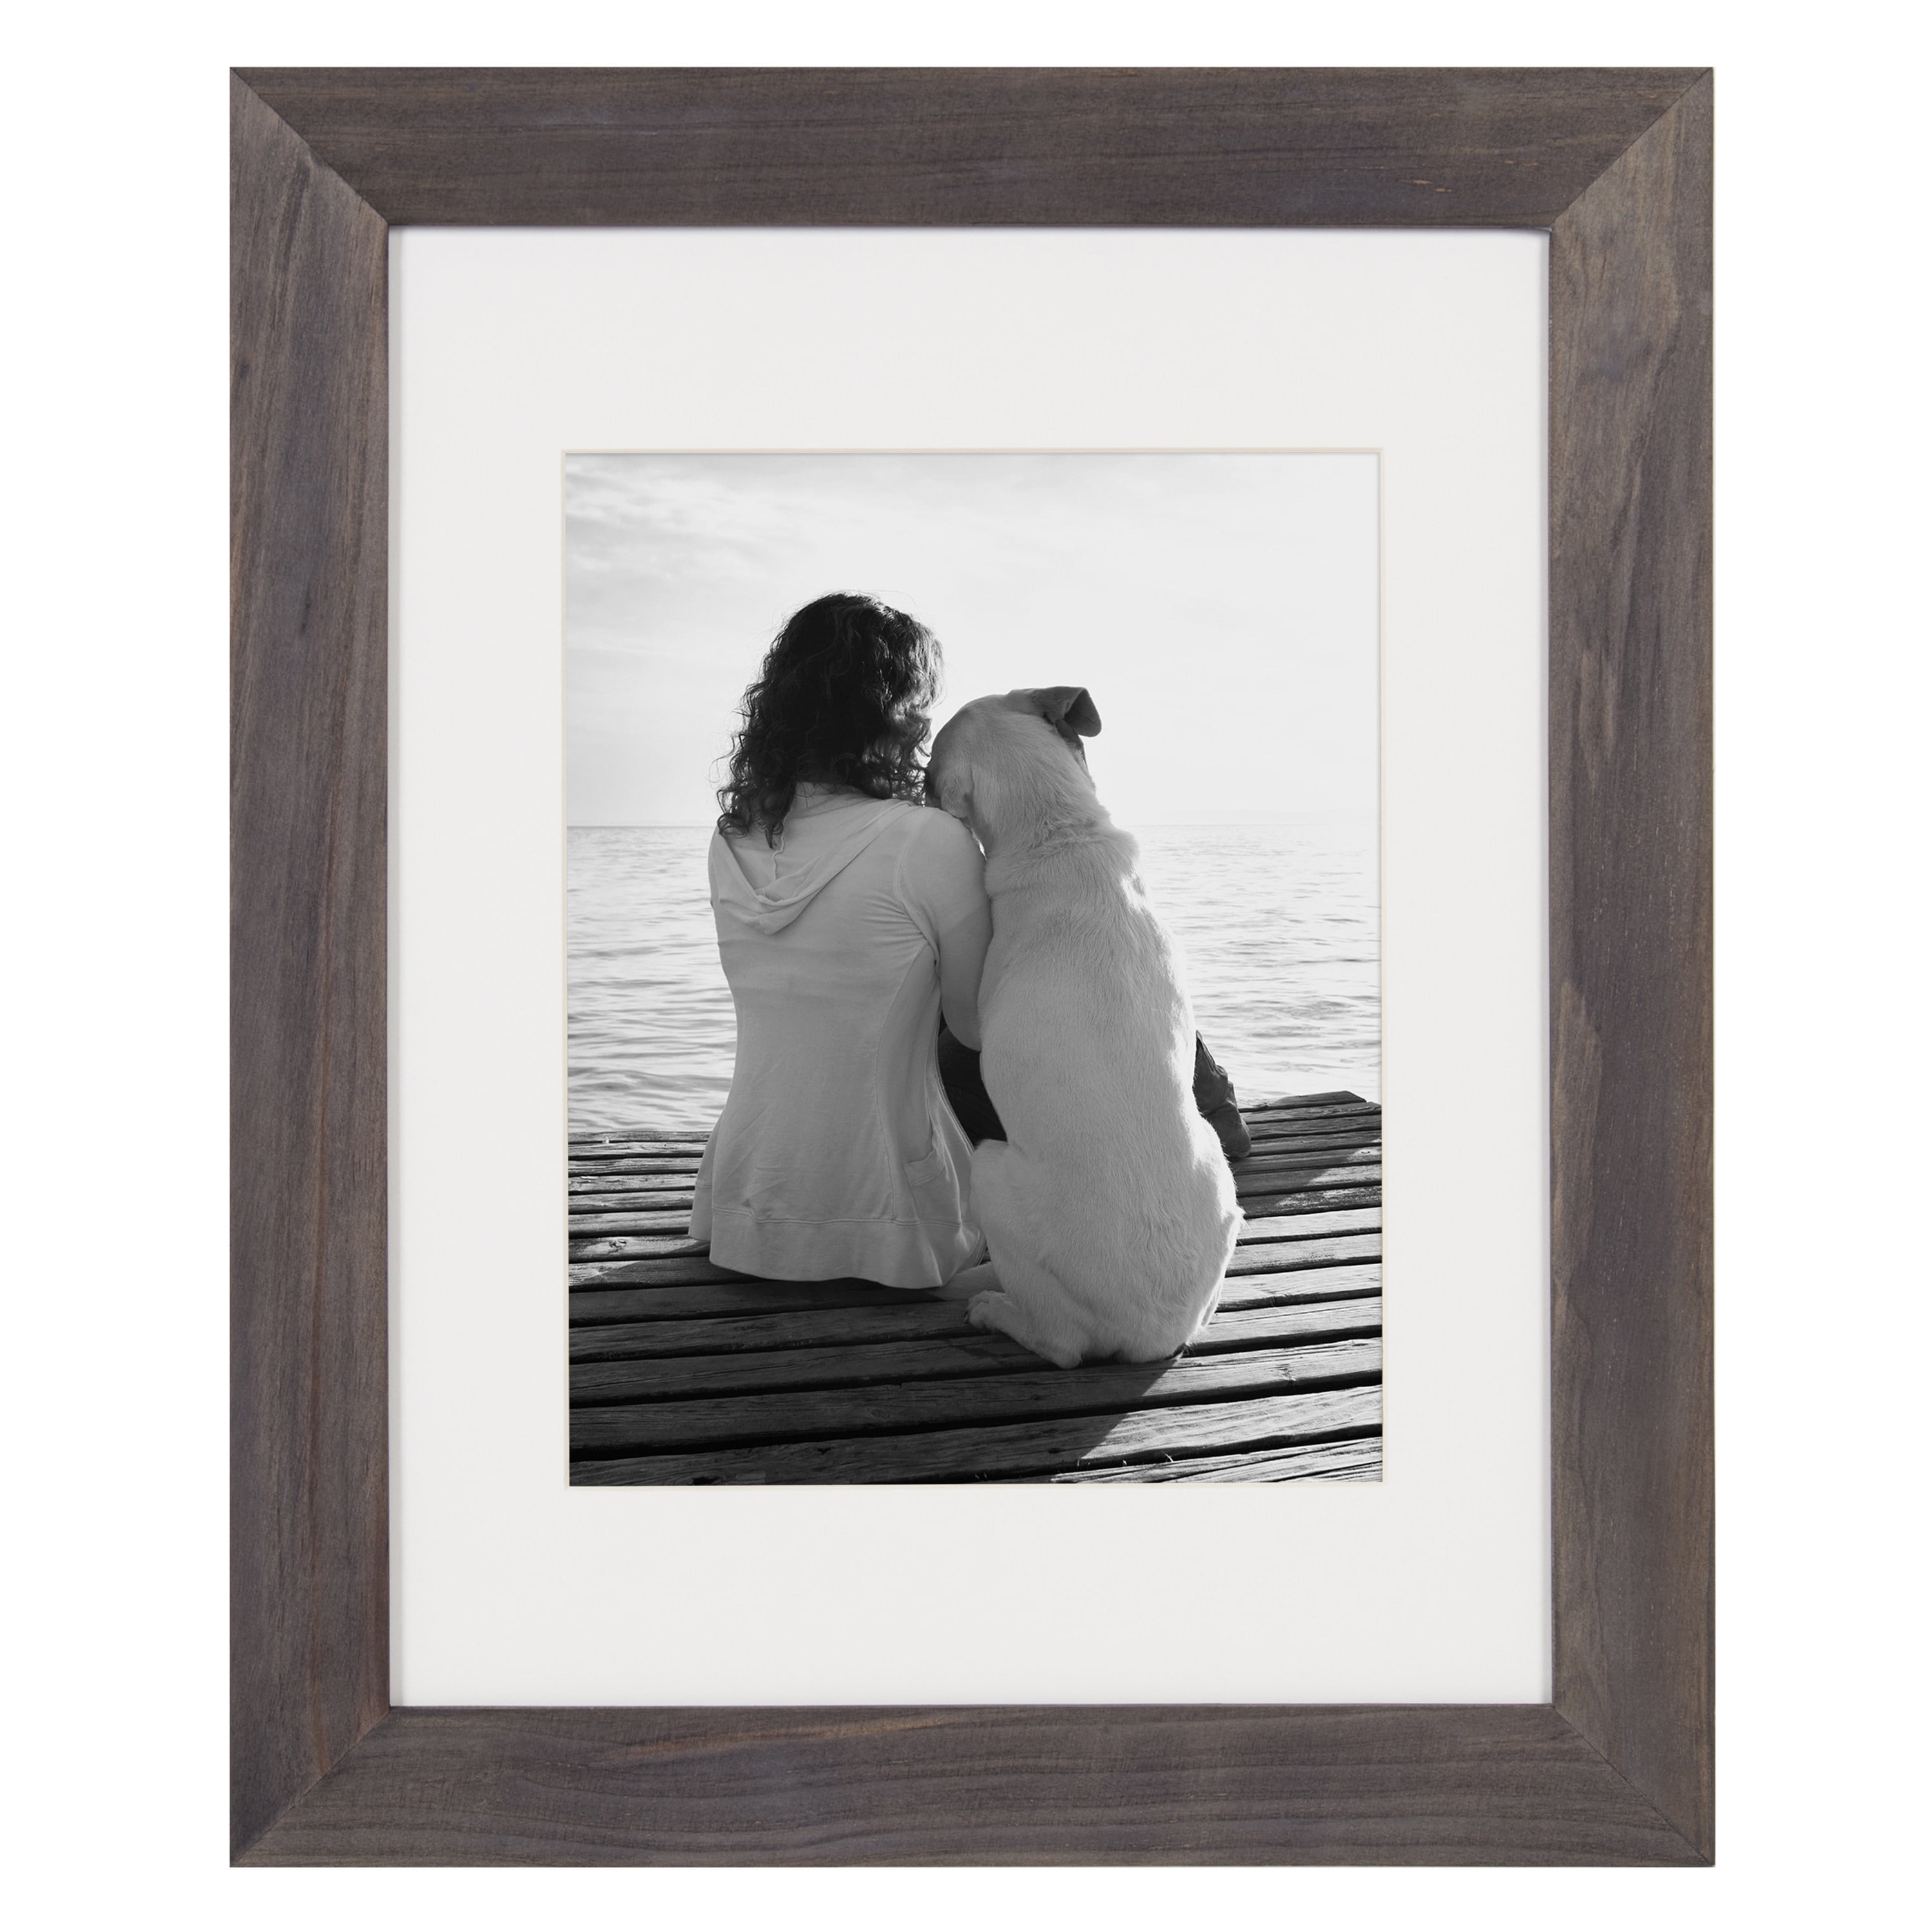 DesignOvation Gallery 16x20 matted to 8x10 Black Picture Frame Set